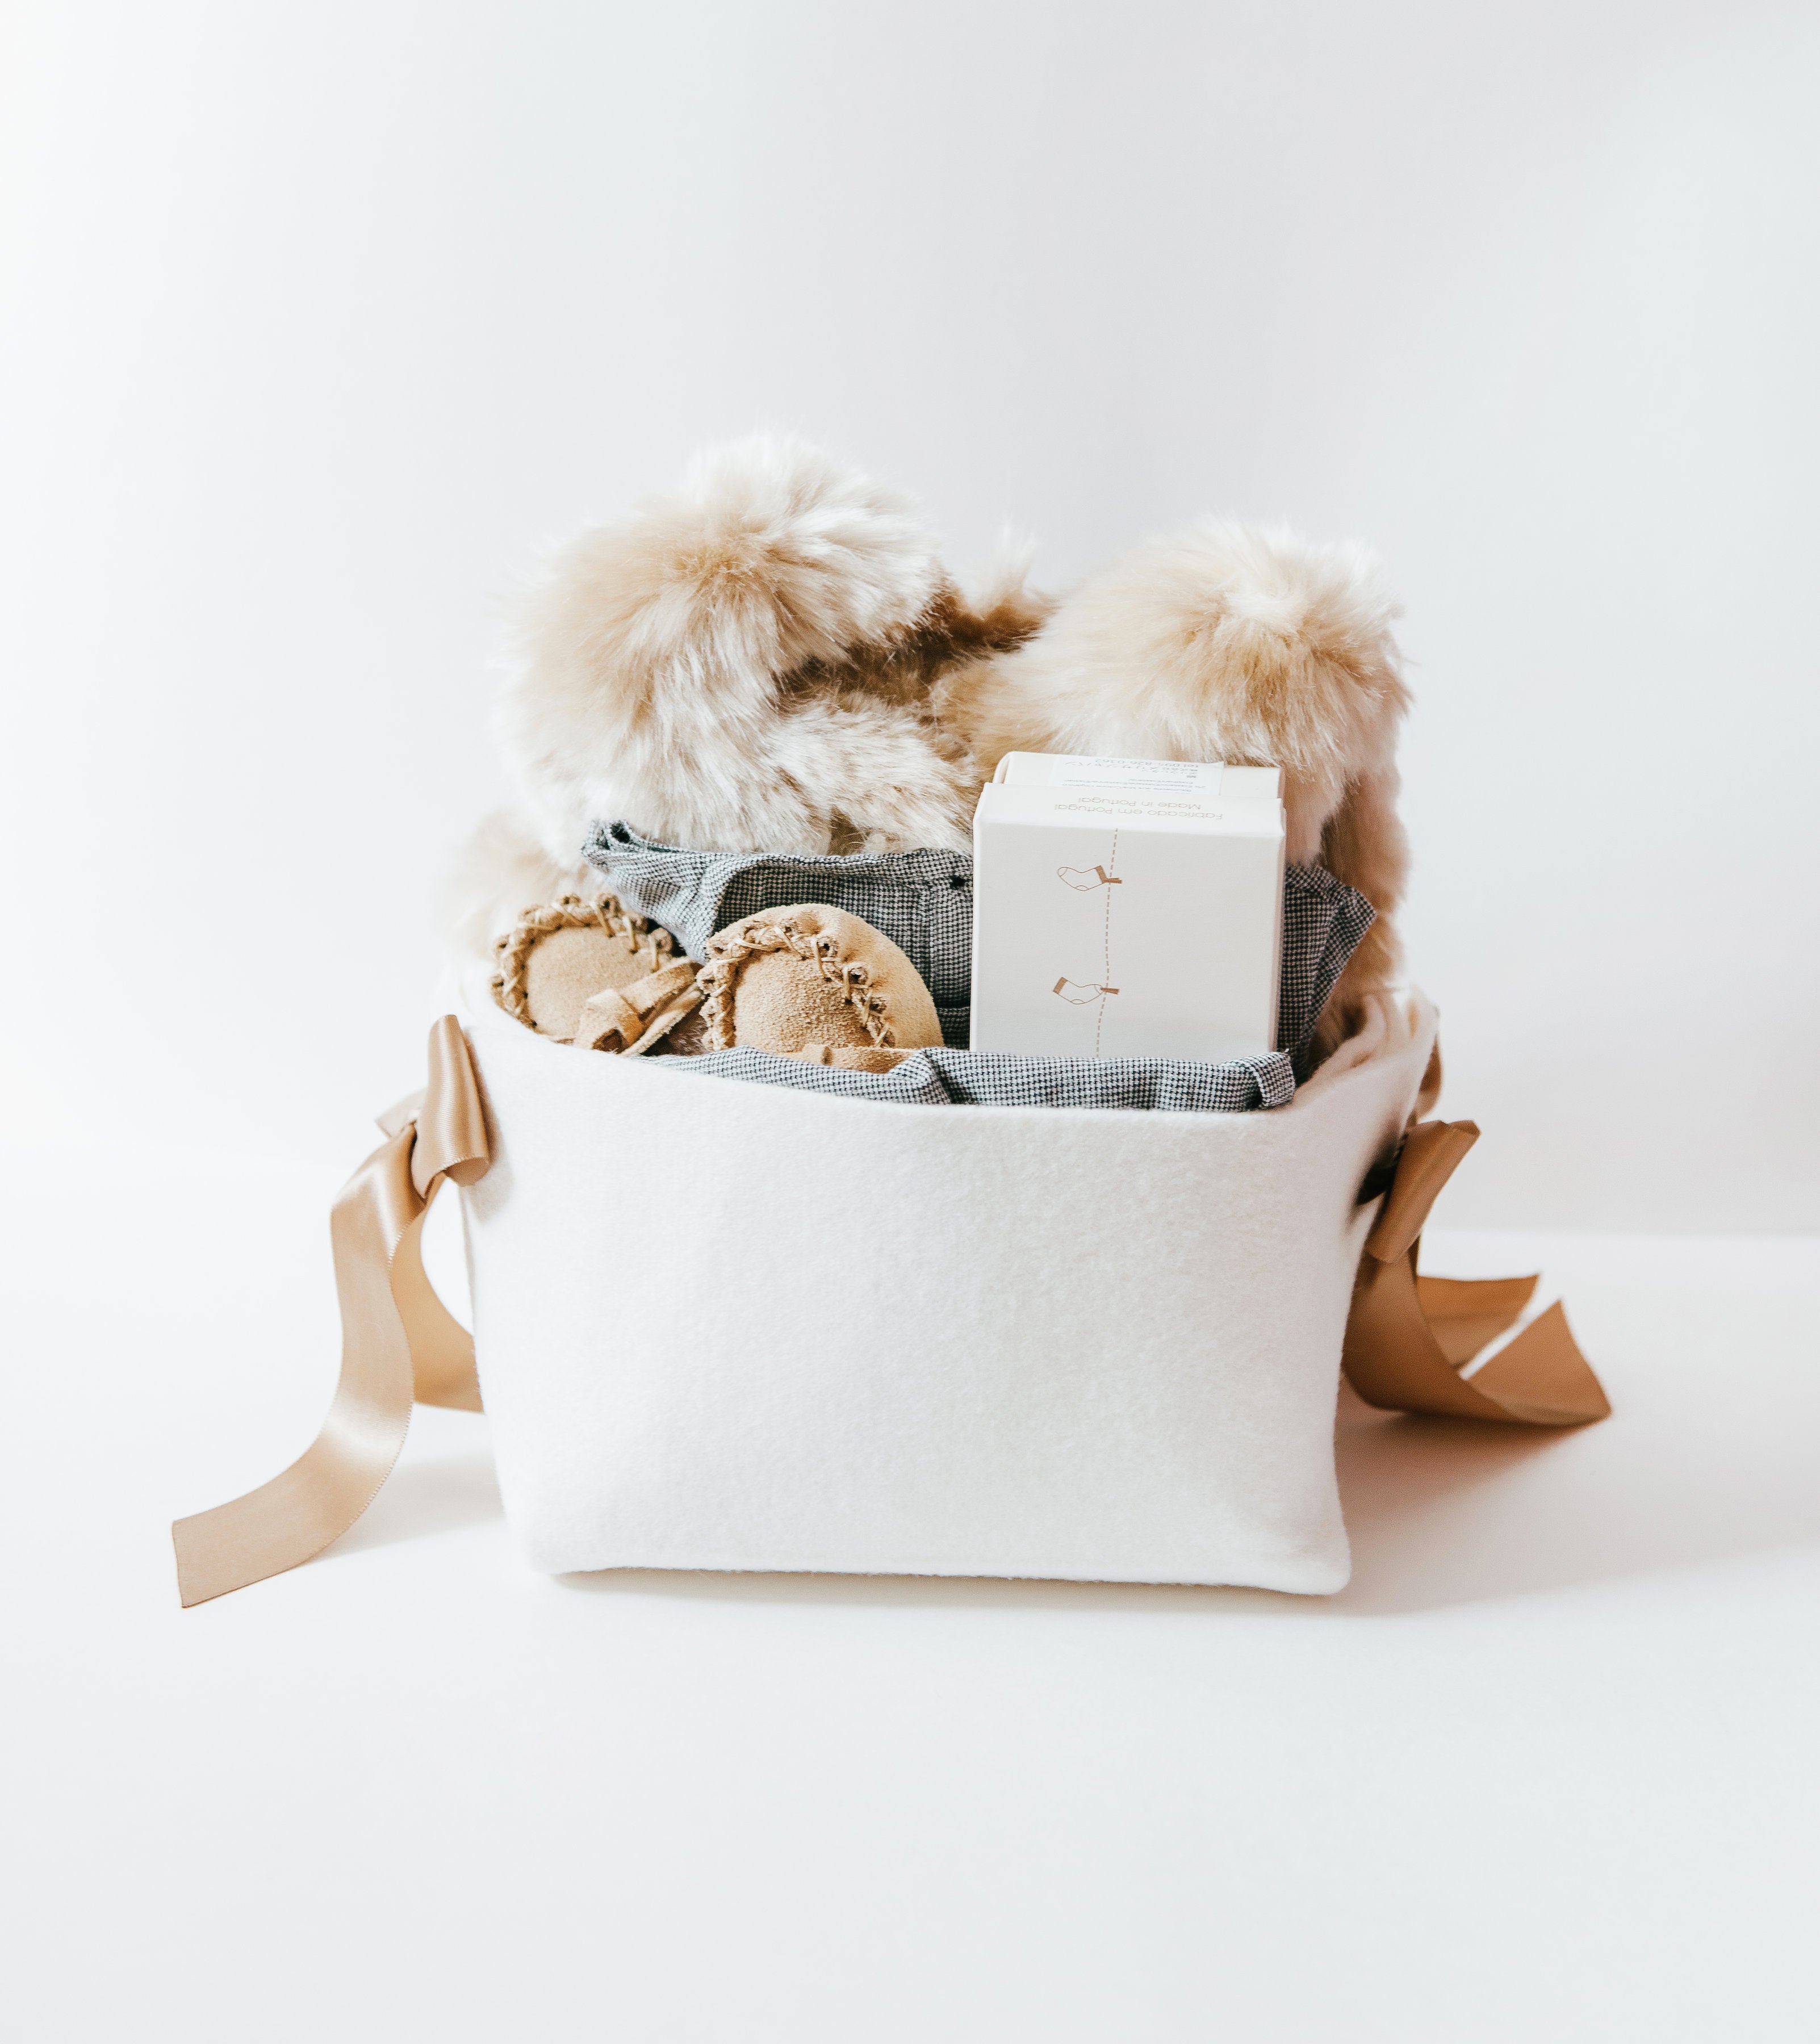 Luxury Baby Gift by Bonjour Baby Baskets